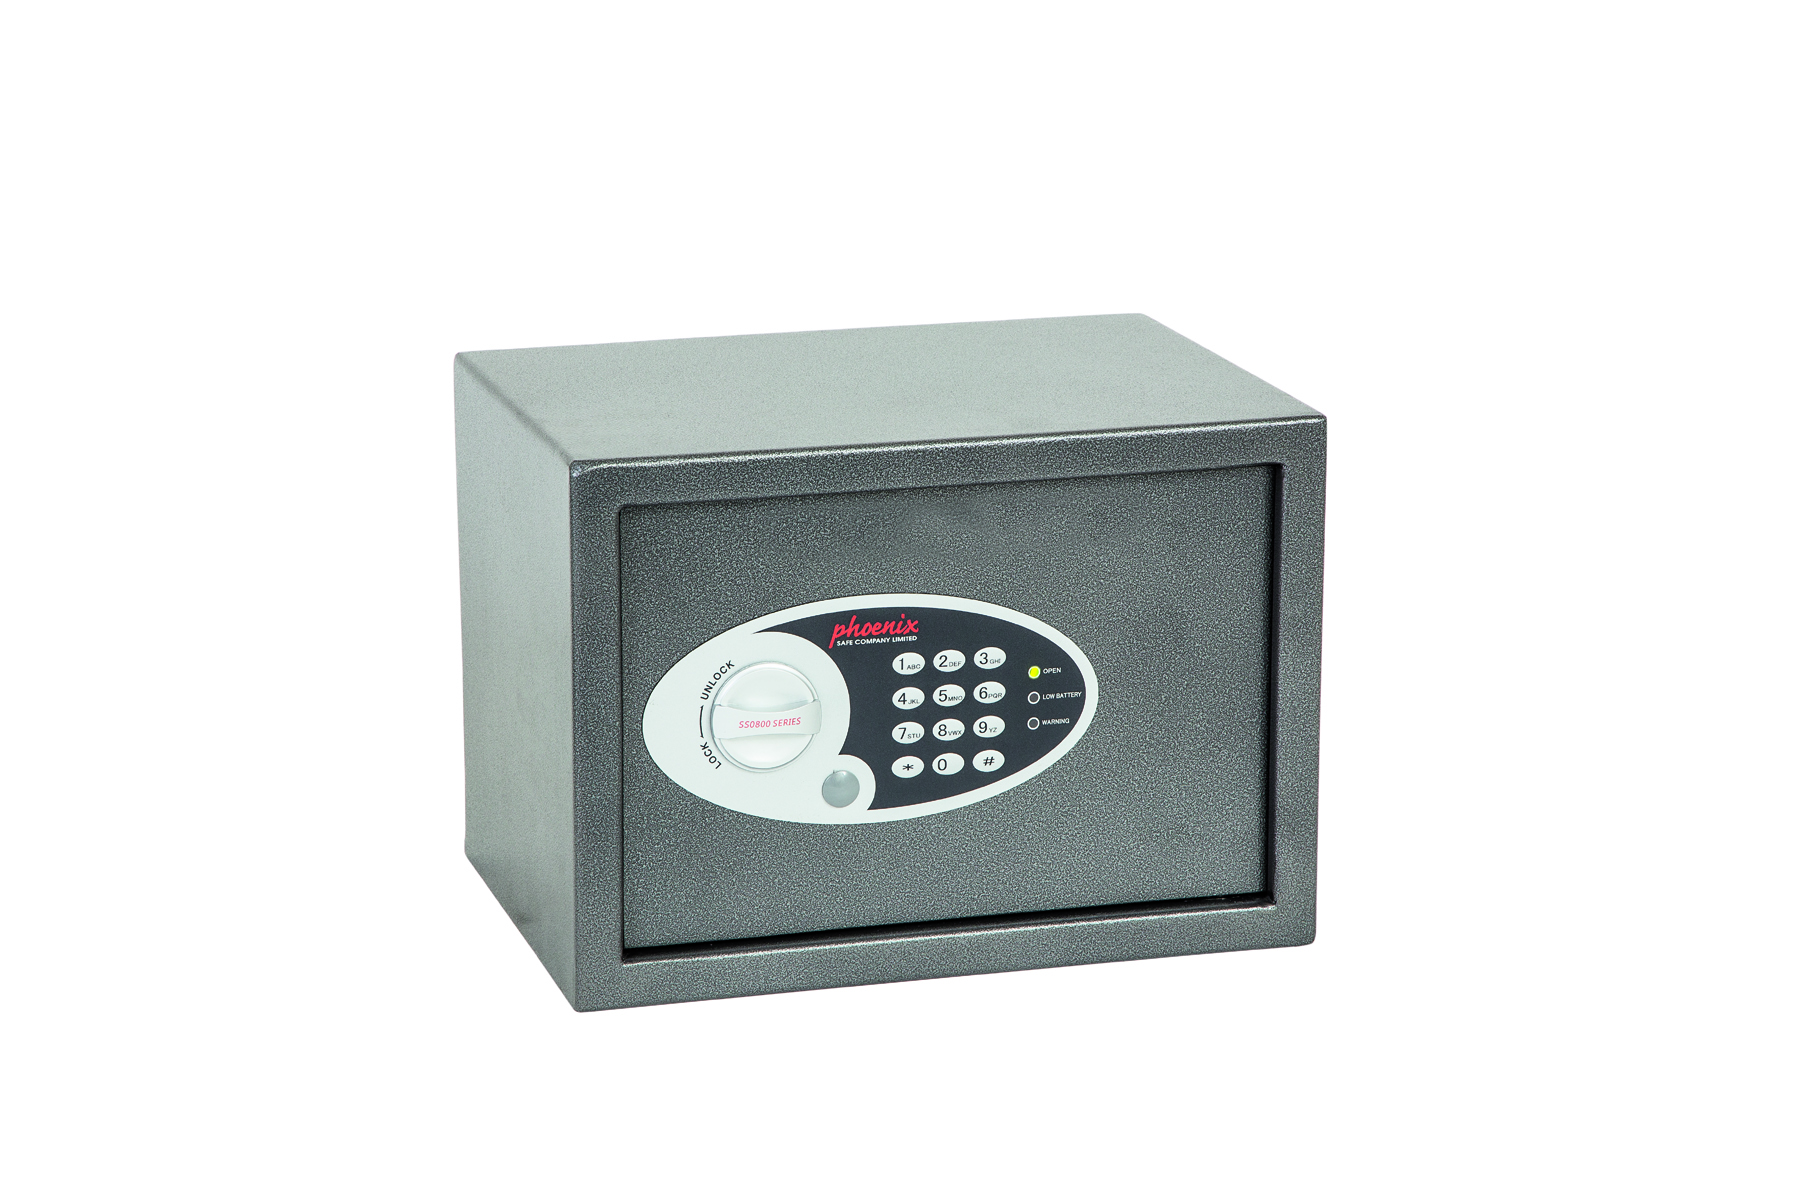 Phoenix Safe Dione Hotel & Laptop safe SS0801E is a £1000 cash rated security safe that is used as a hotel safe, guest safe or residential safe. This is a size of 250 x 350 x 250mm and finished in a graphite grey powder coat paint finish. You can use this as a safe for the home, however, you require a code to lock. Its normally left open when not in use so its next user just has to choose a combination for the duration of stay. There is also a bright LED light . for the home with electronic lock.